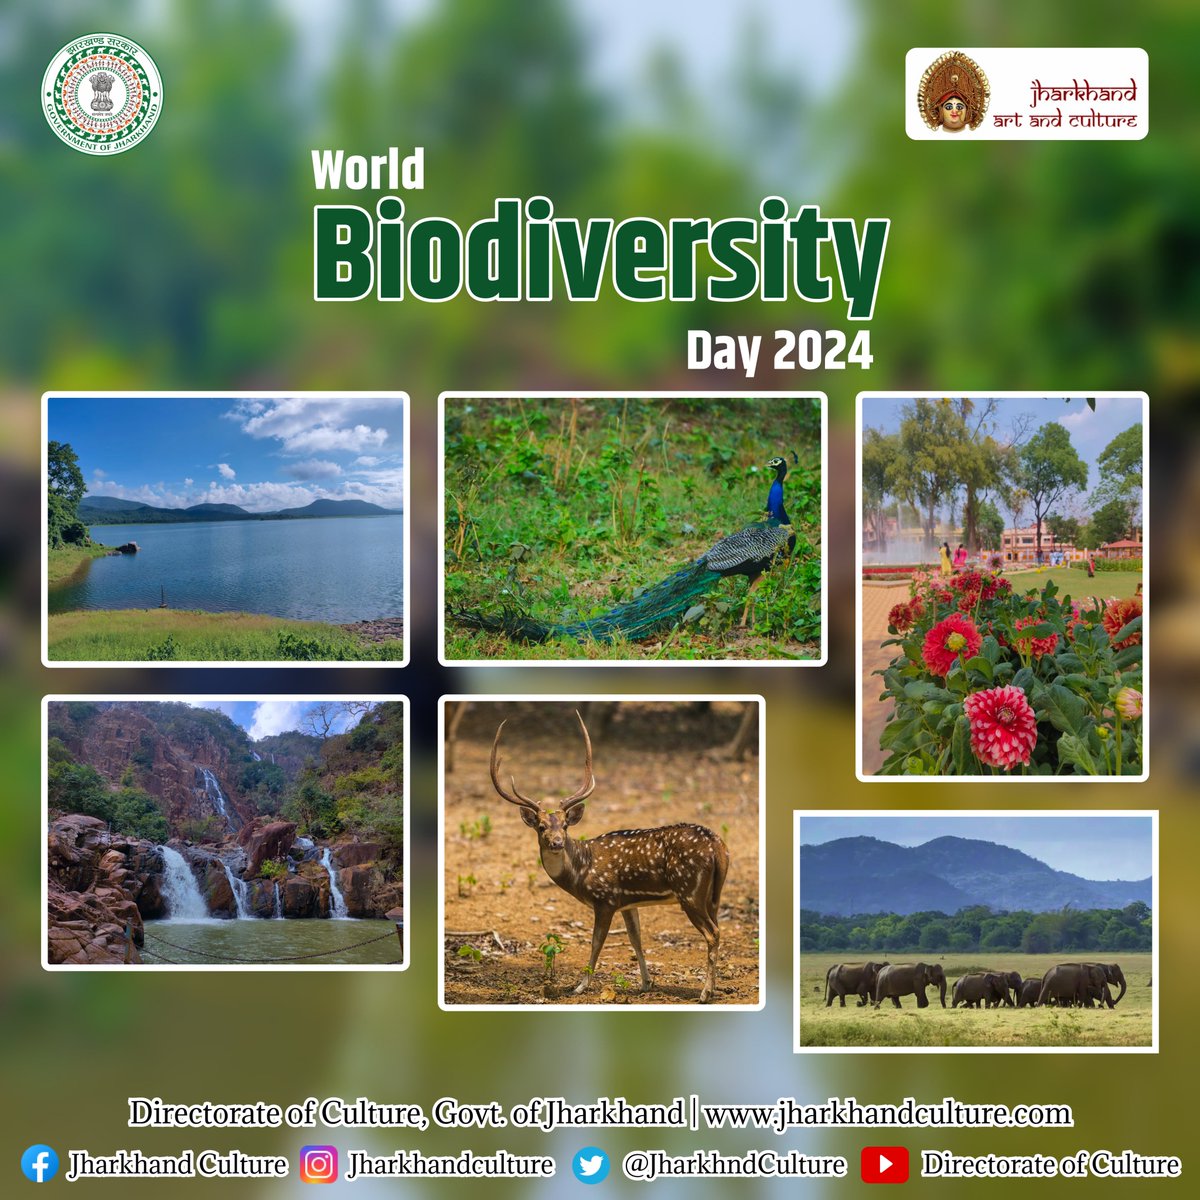 'Celebrate World Biodiversity Day 2024: Embrace Nature's Tapestry, Protect Our Planet's Rich Heritage!'
.
.
#WorldBiodiversityDay #Biodiversity2024 #ProtectOurPlanet #NatureConservation #BiodiversityMatters #SustainableFuture #EcoFriendly #SaveOurSpecies